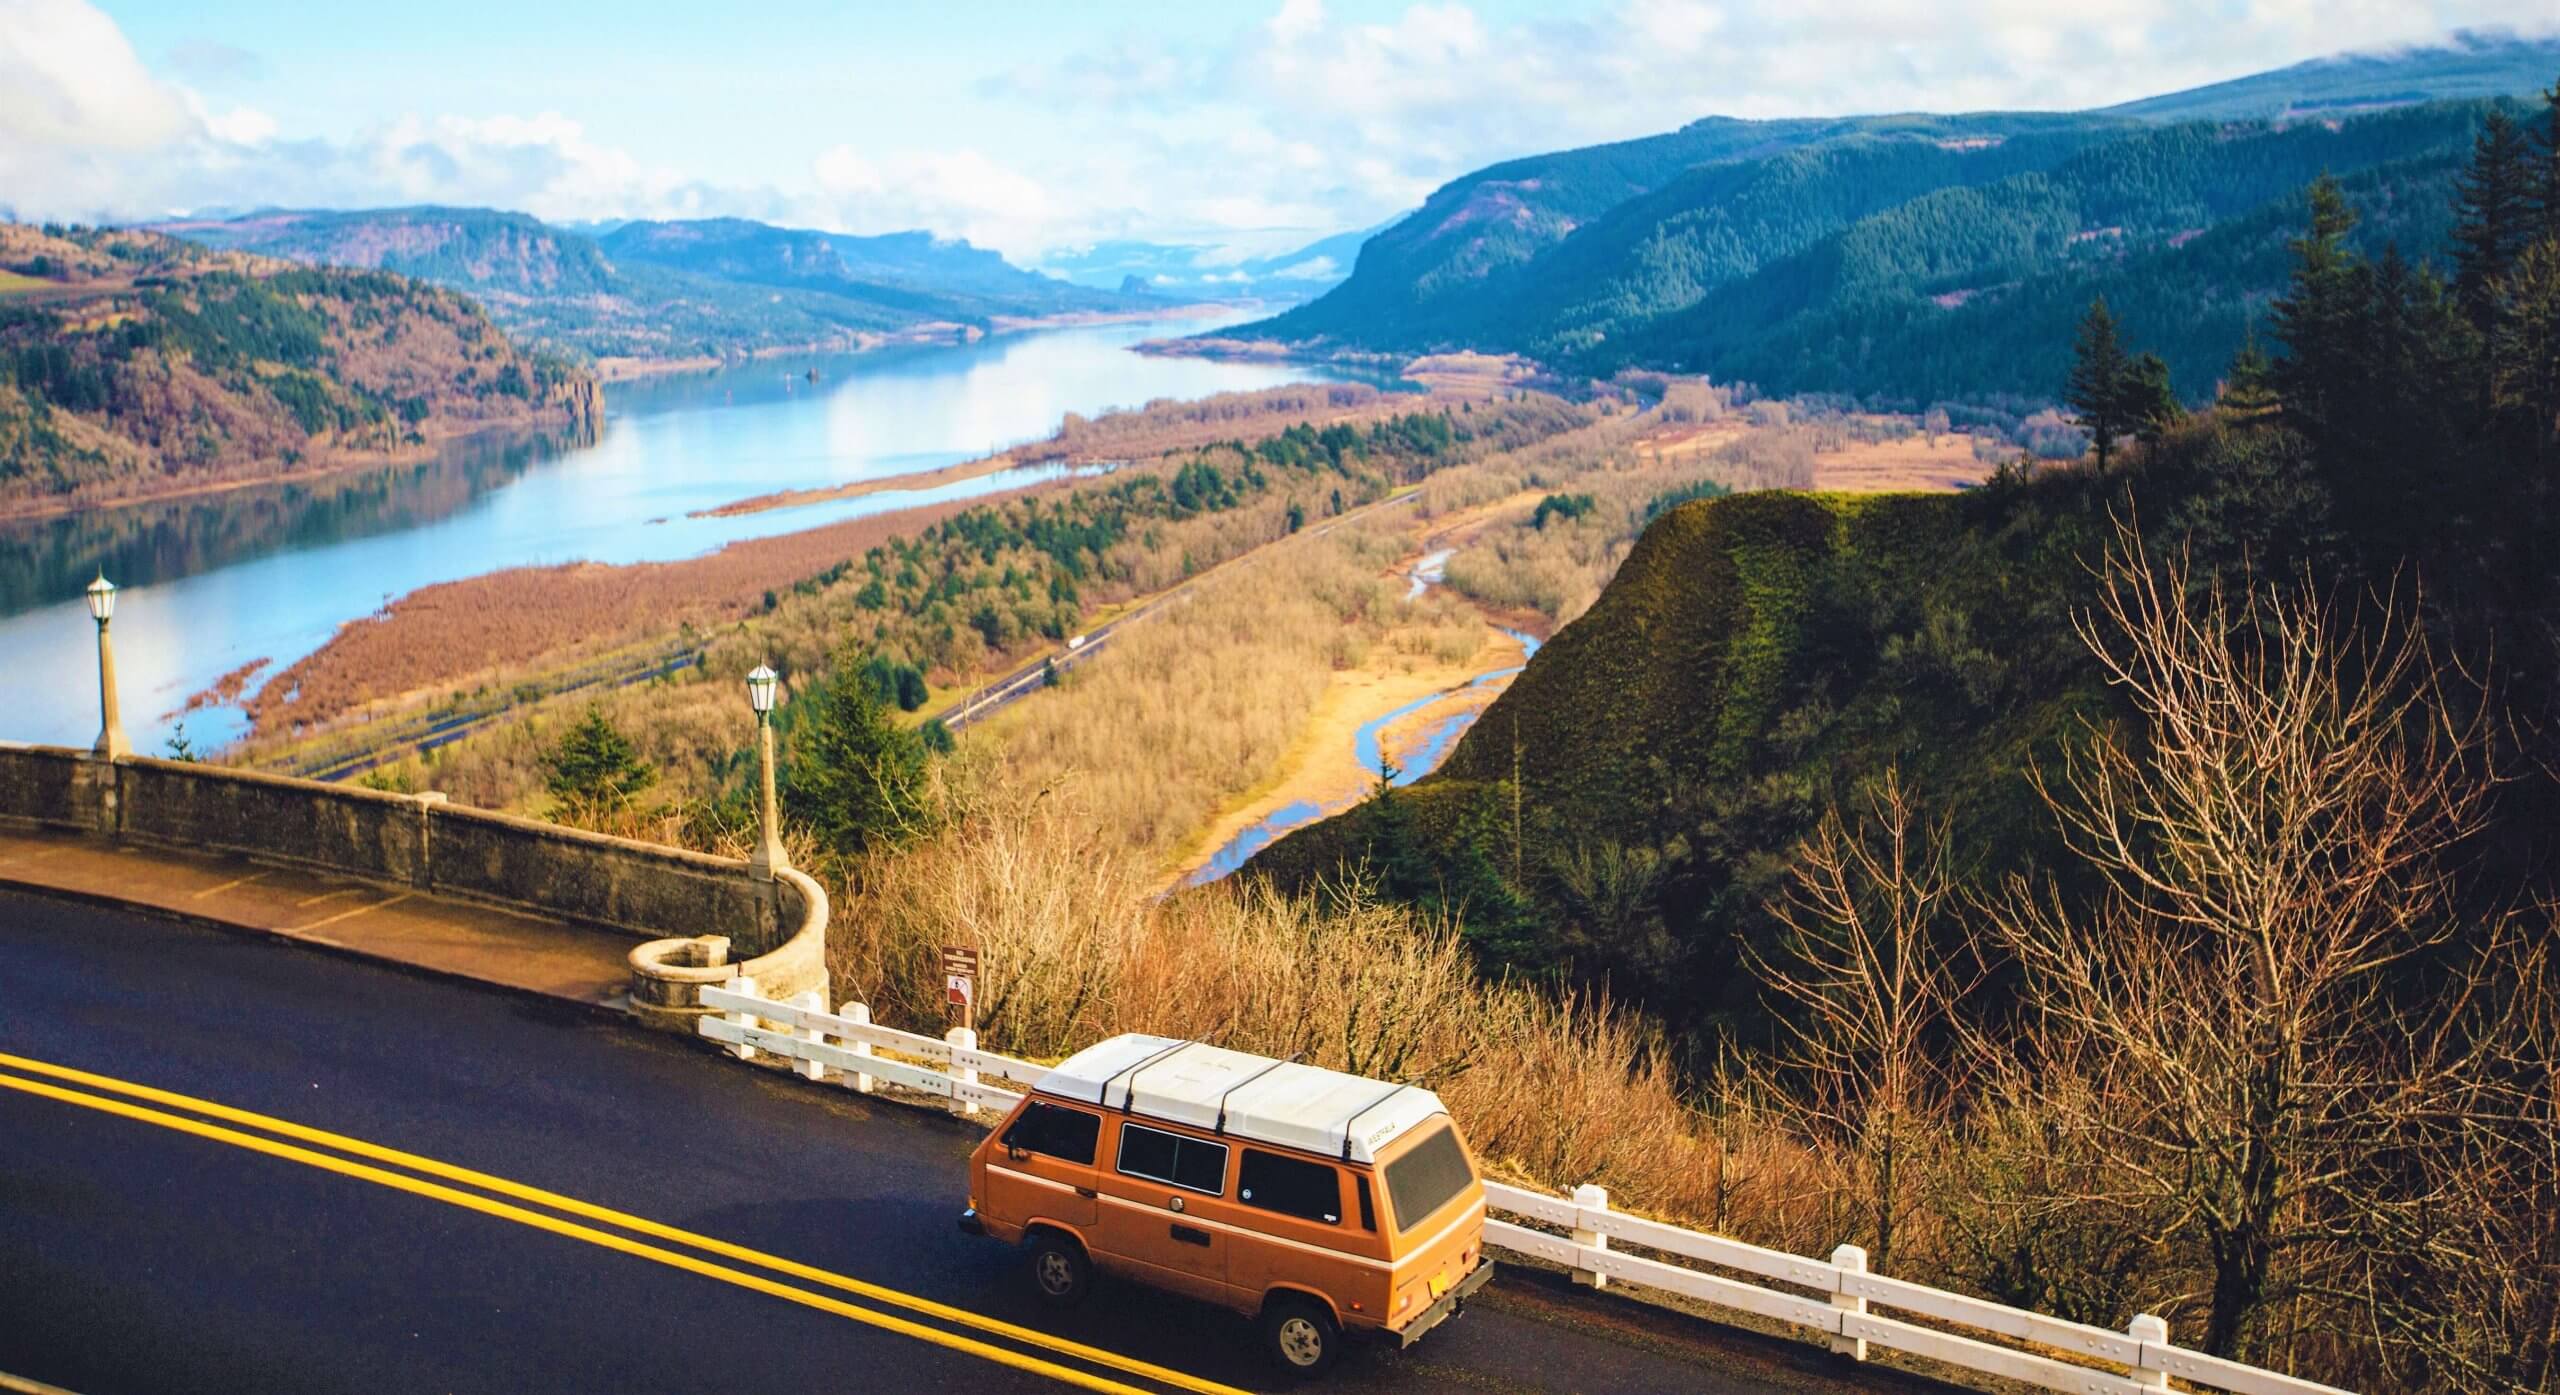 Plan a budget US road trips with TollGuru to save on tolls and gas costs